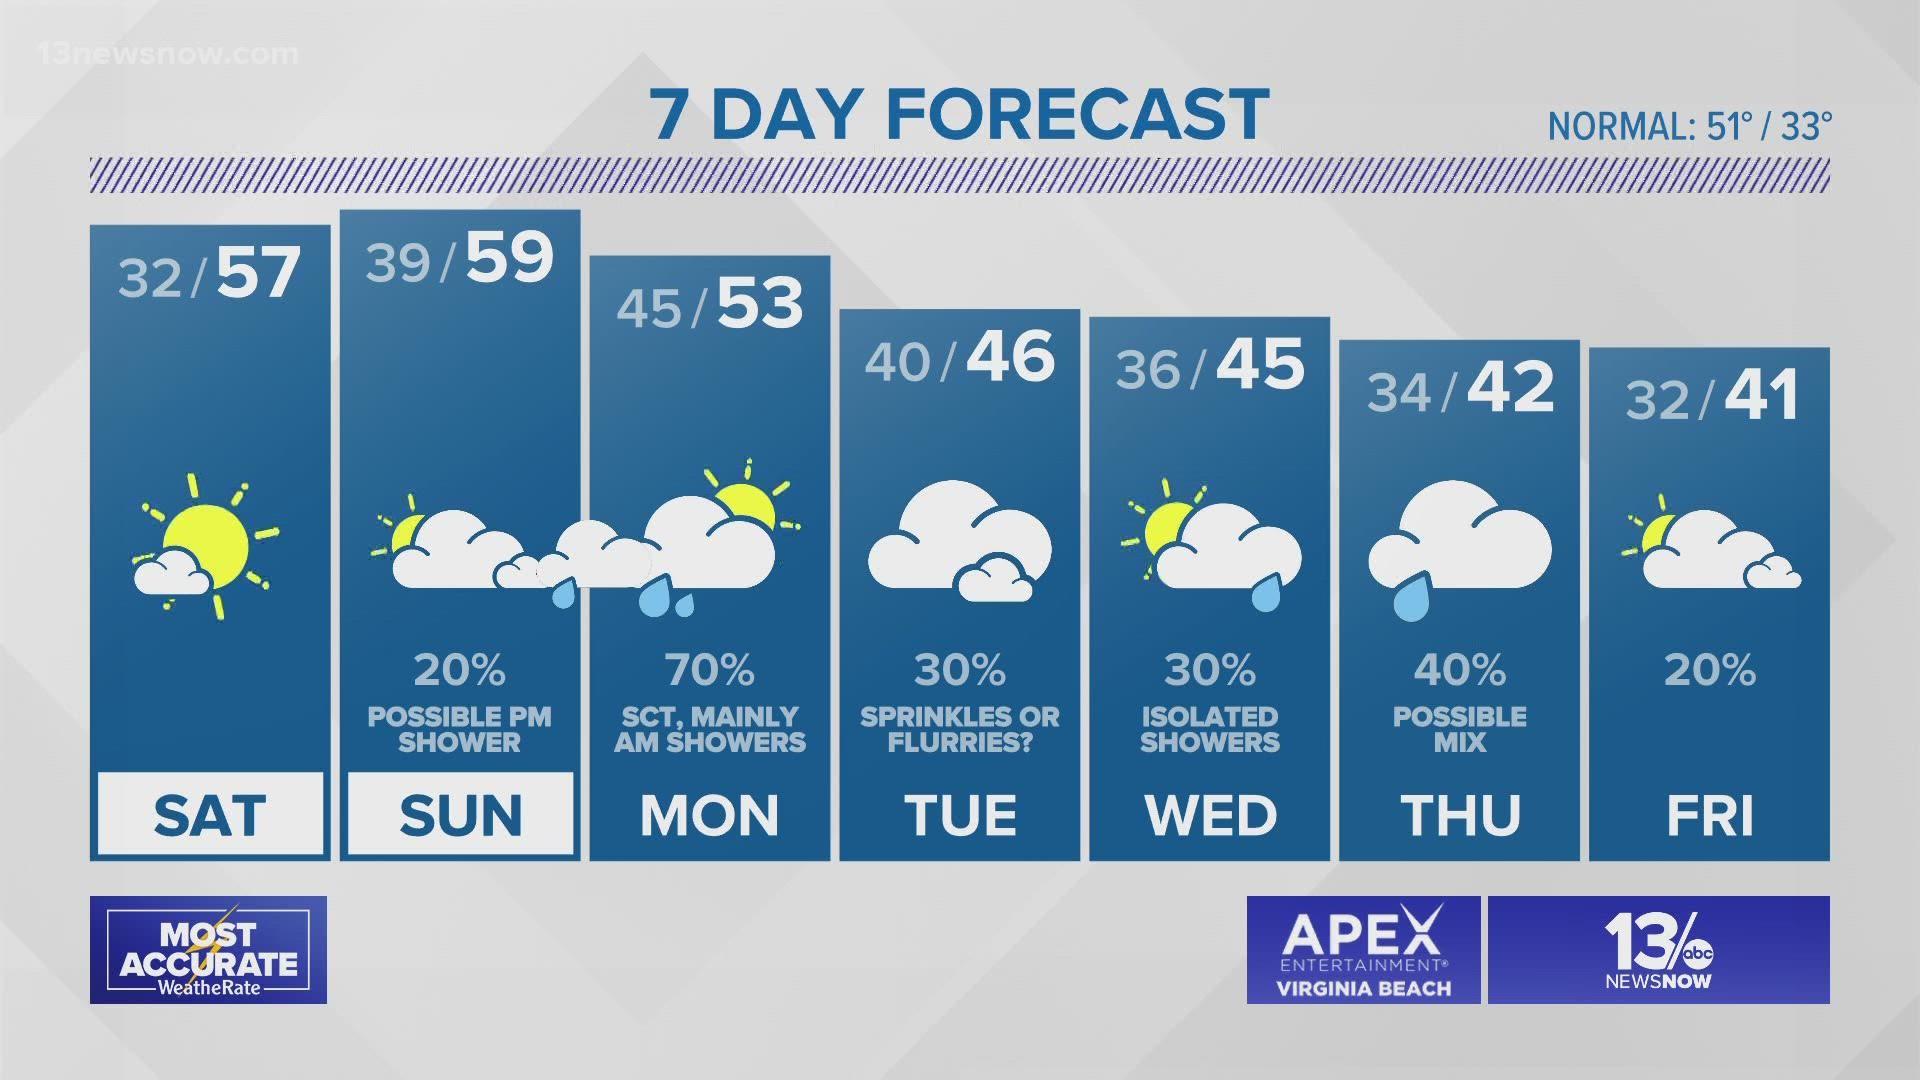 After a cool Friday, the weekend looks a little warmer. Unsettled weather returns for much of next week.